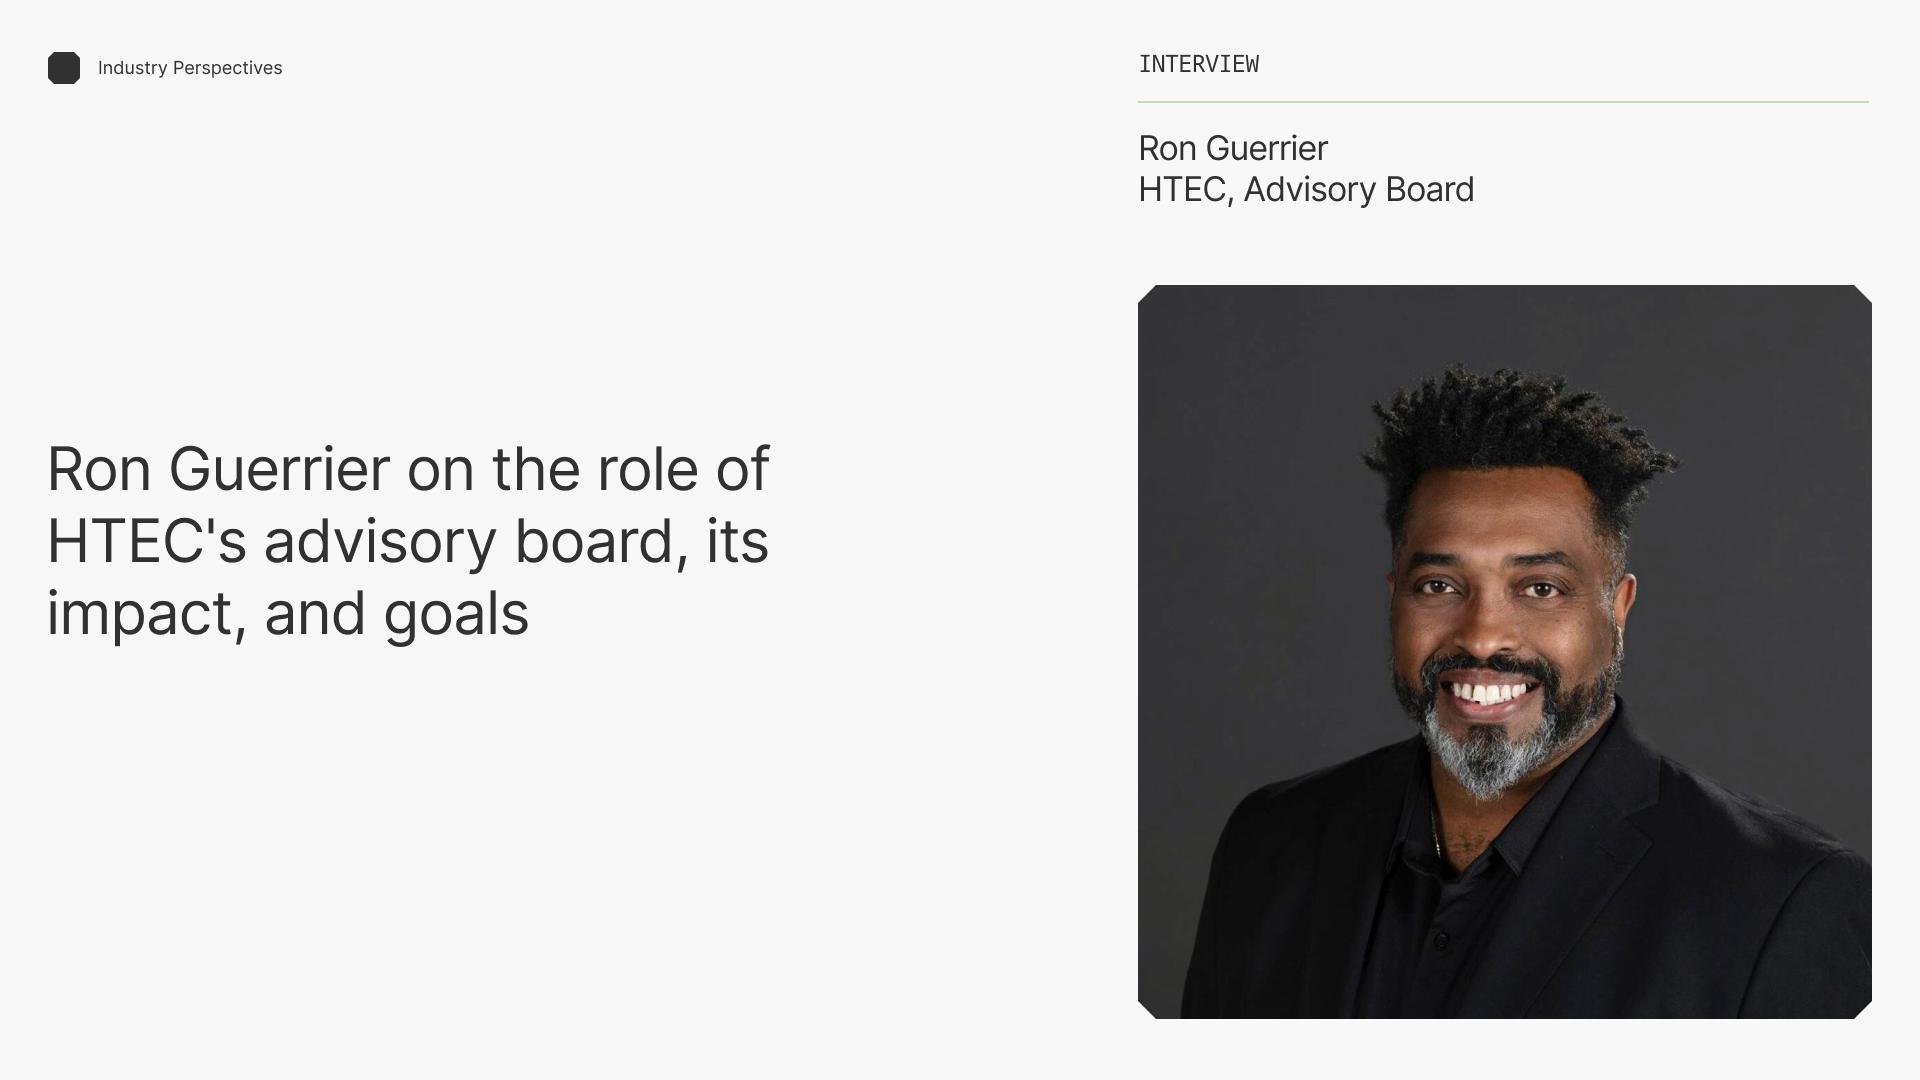 HTEC Advisory Board perspective: Interview with Ron Guerrier, four-time Fortune 500 CIO 